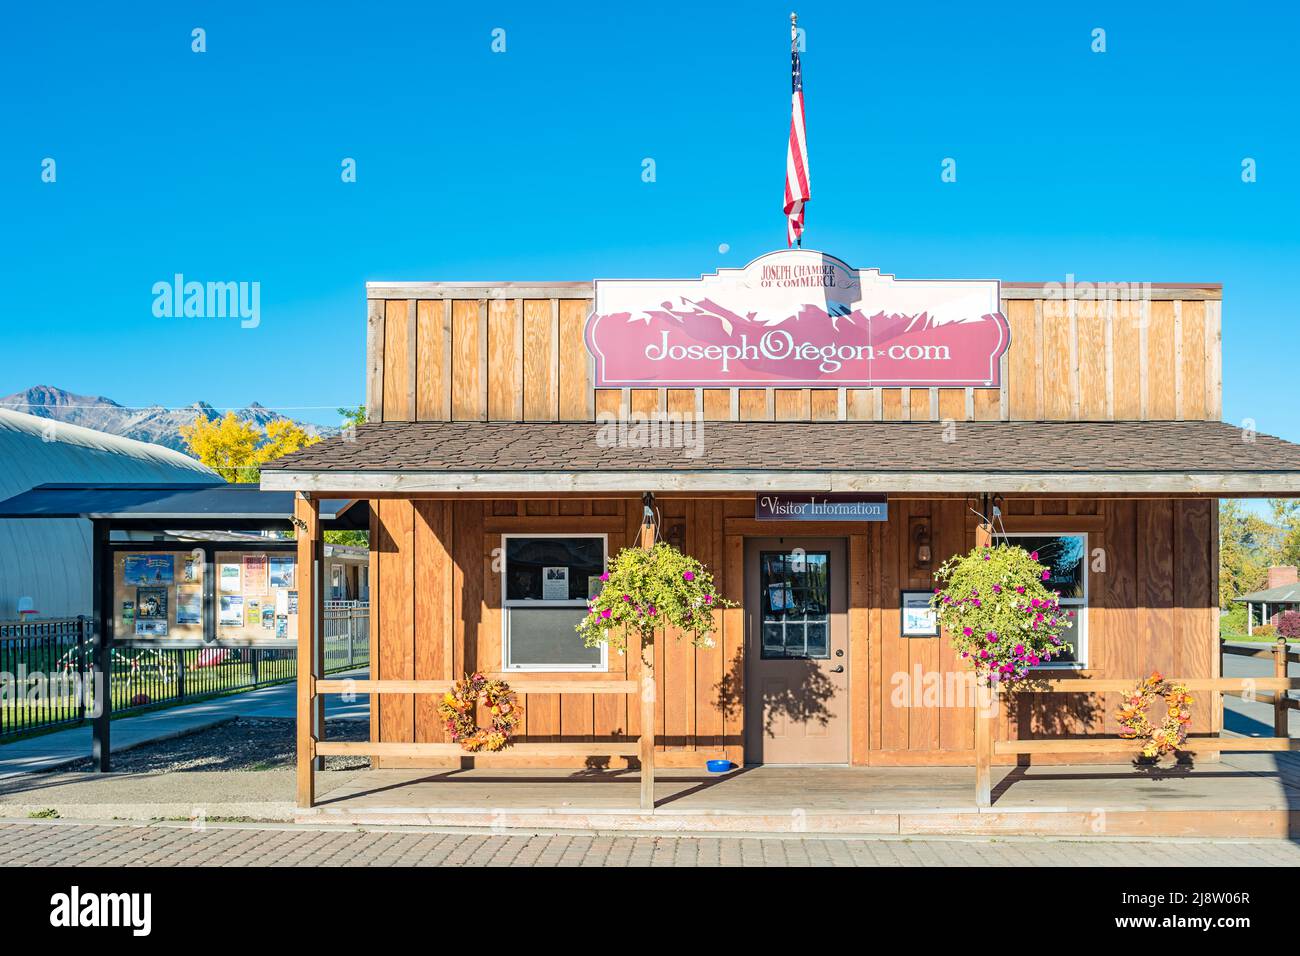 Chamber of Commerce in downtown Joseph, Oregon, USA Stock Photo